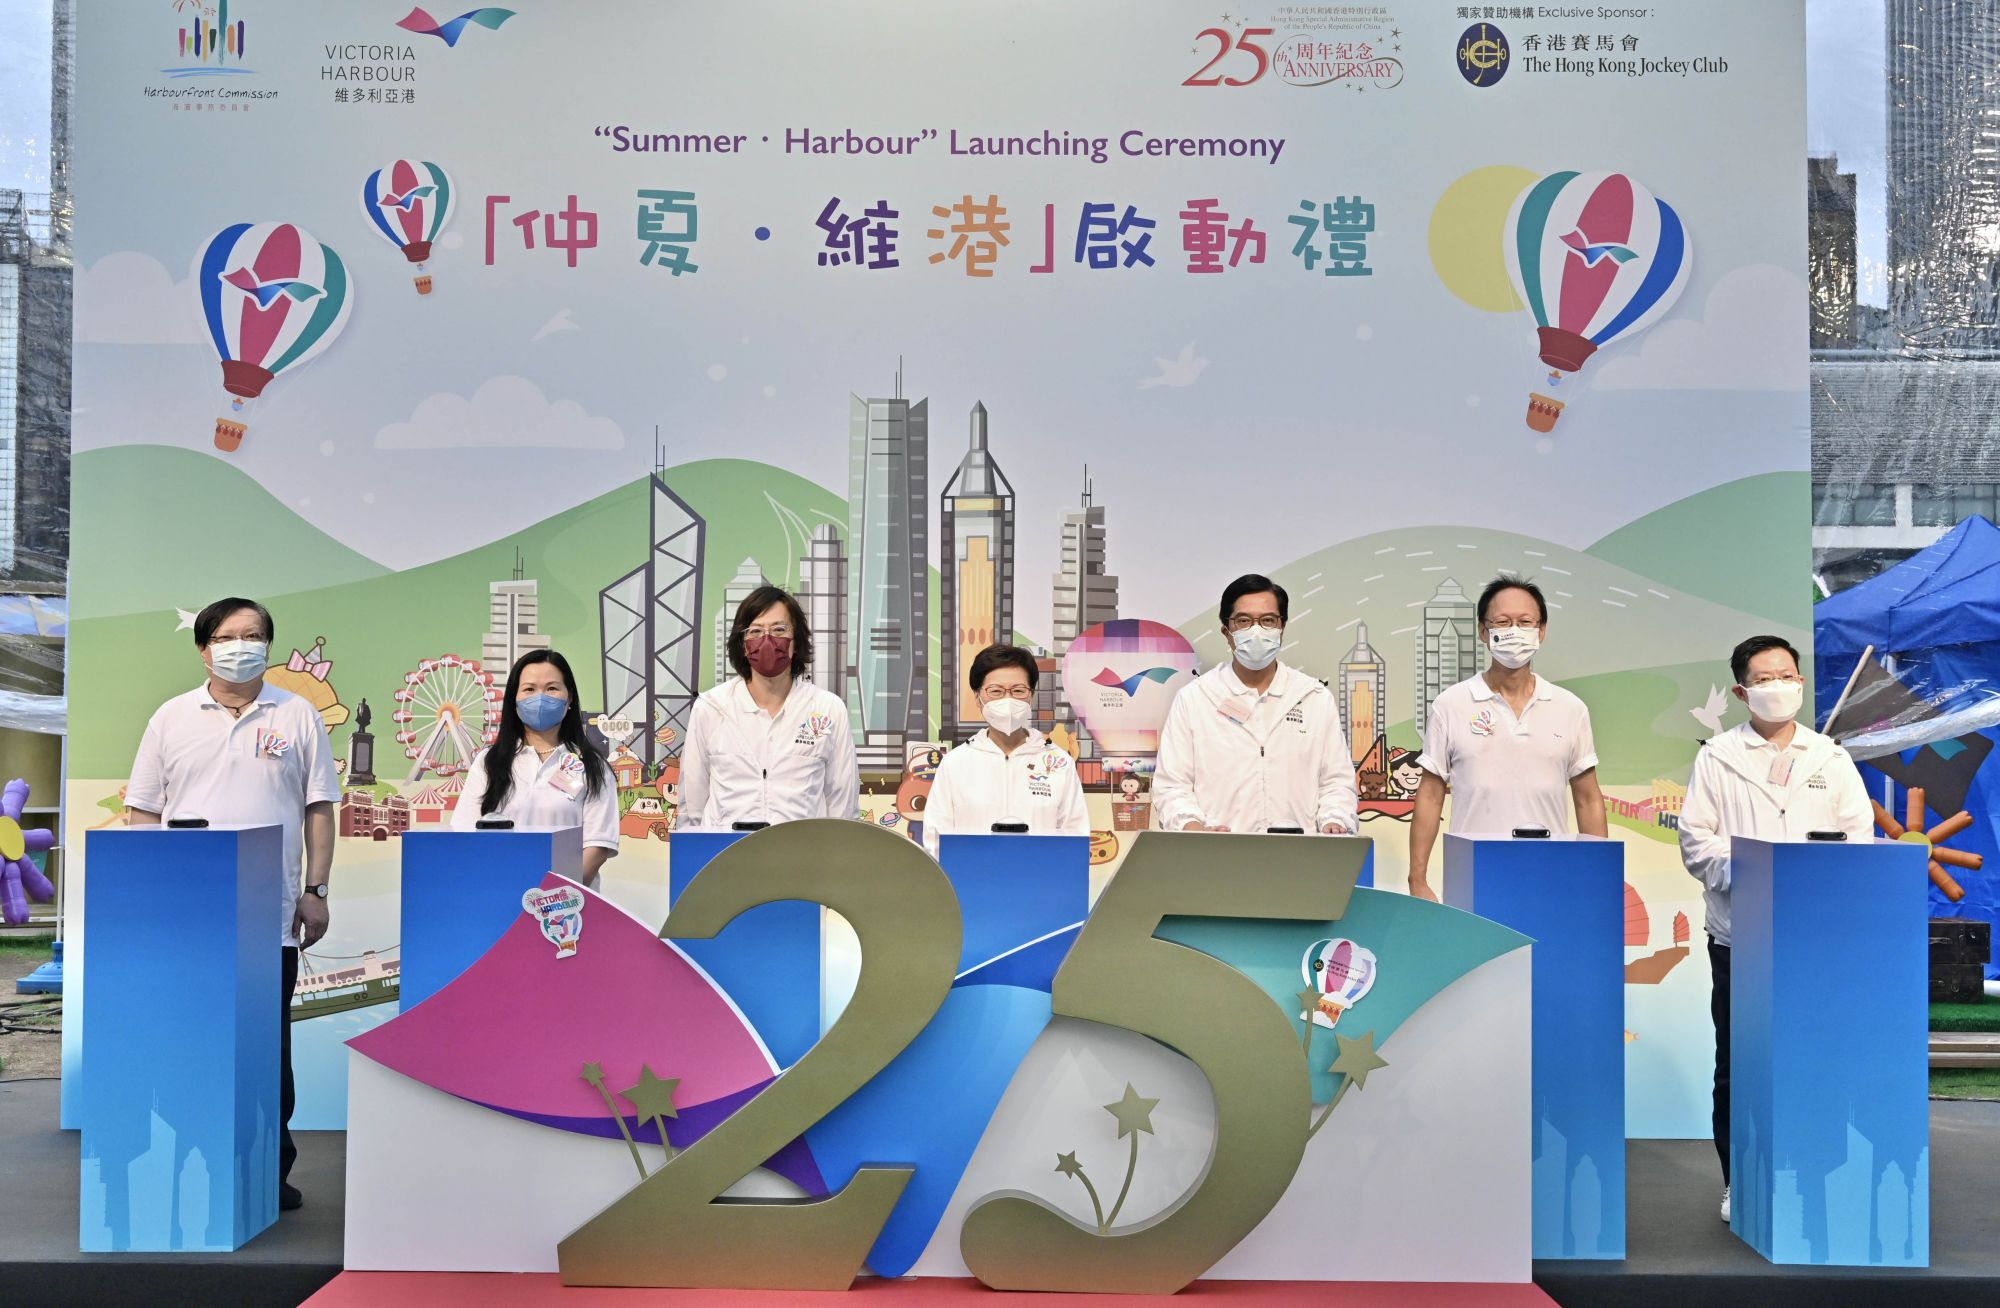 The launching ceremony of “Summer·Harbour” has been held earlier on. Pictured are (from left) the Chairman of the Task Force on Water-land Interface and Harbourfront Activation, Mr LEUNG Kong-yui; the Chairperson of the Task Force on Harbourfront Developments in Kowloon, Tsuen Wan and Kwai Tsing, Professor Becky LOO; the Chairman of the Harbourfront Commission, Mr Vincent NG; the Chief Executive, Mrs Carrie LAM; the Secretary for Development, Mr Michael WONG; the Chairman of the Hong Kong Jockey Club, Mr Philip CHEN; and the Chairman of the Task Force on Harbourfront Developments on Hong Kong Island, Mr Ivan HO, officiating at the launching ceremony.